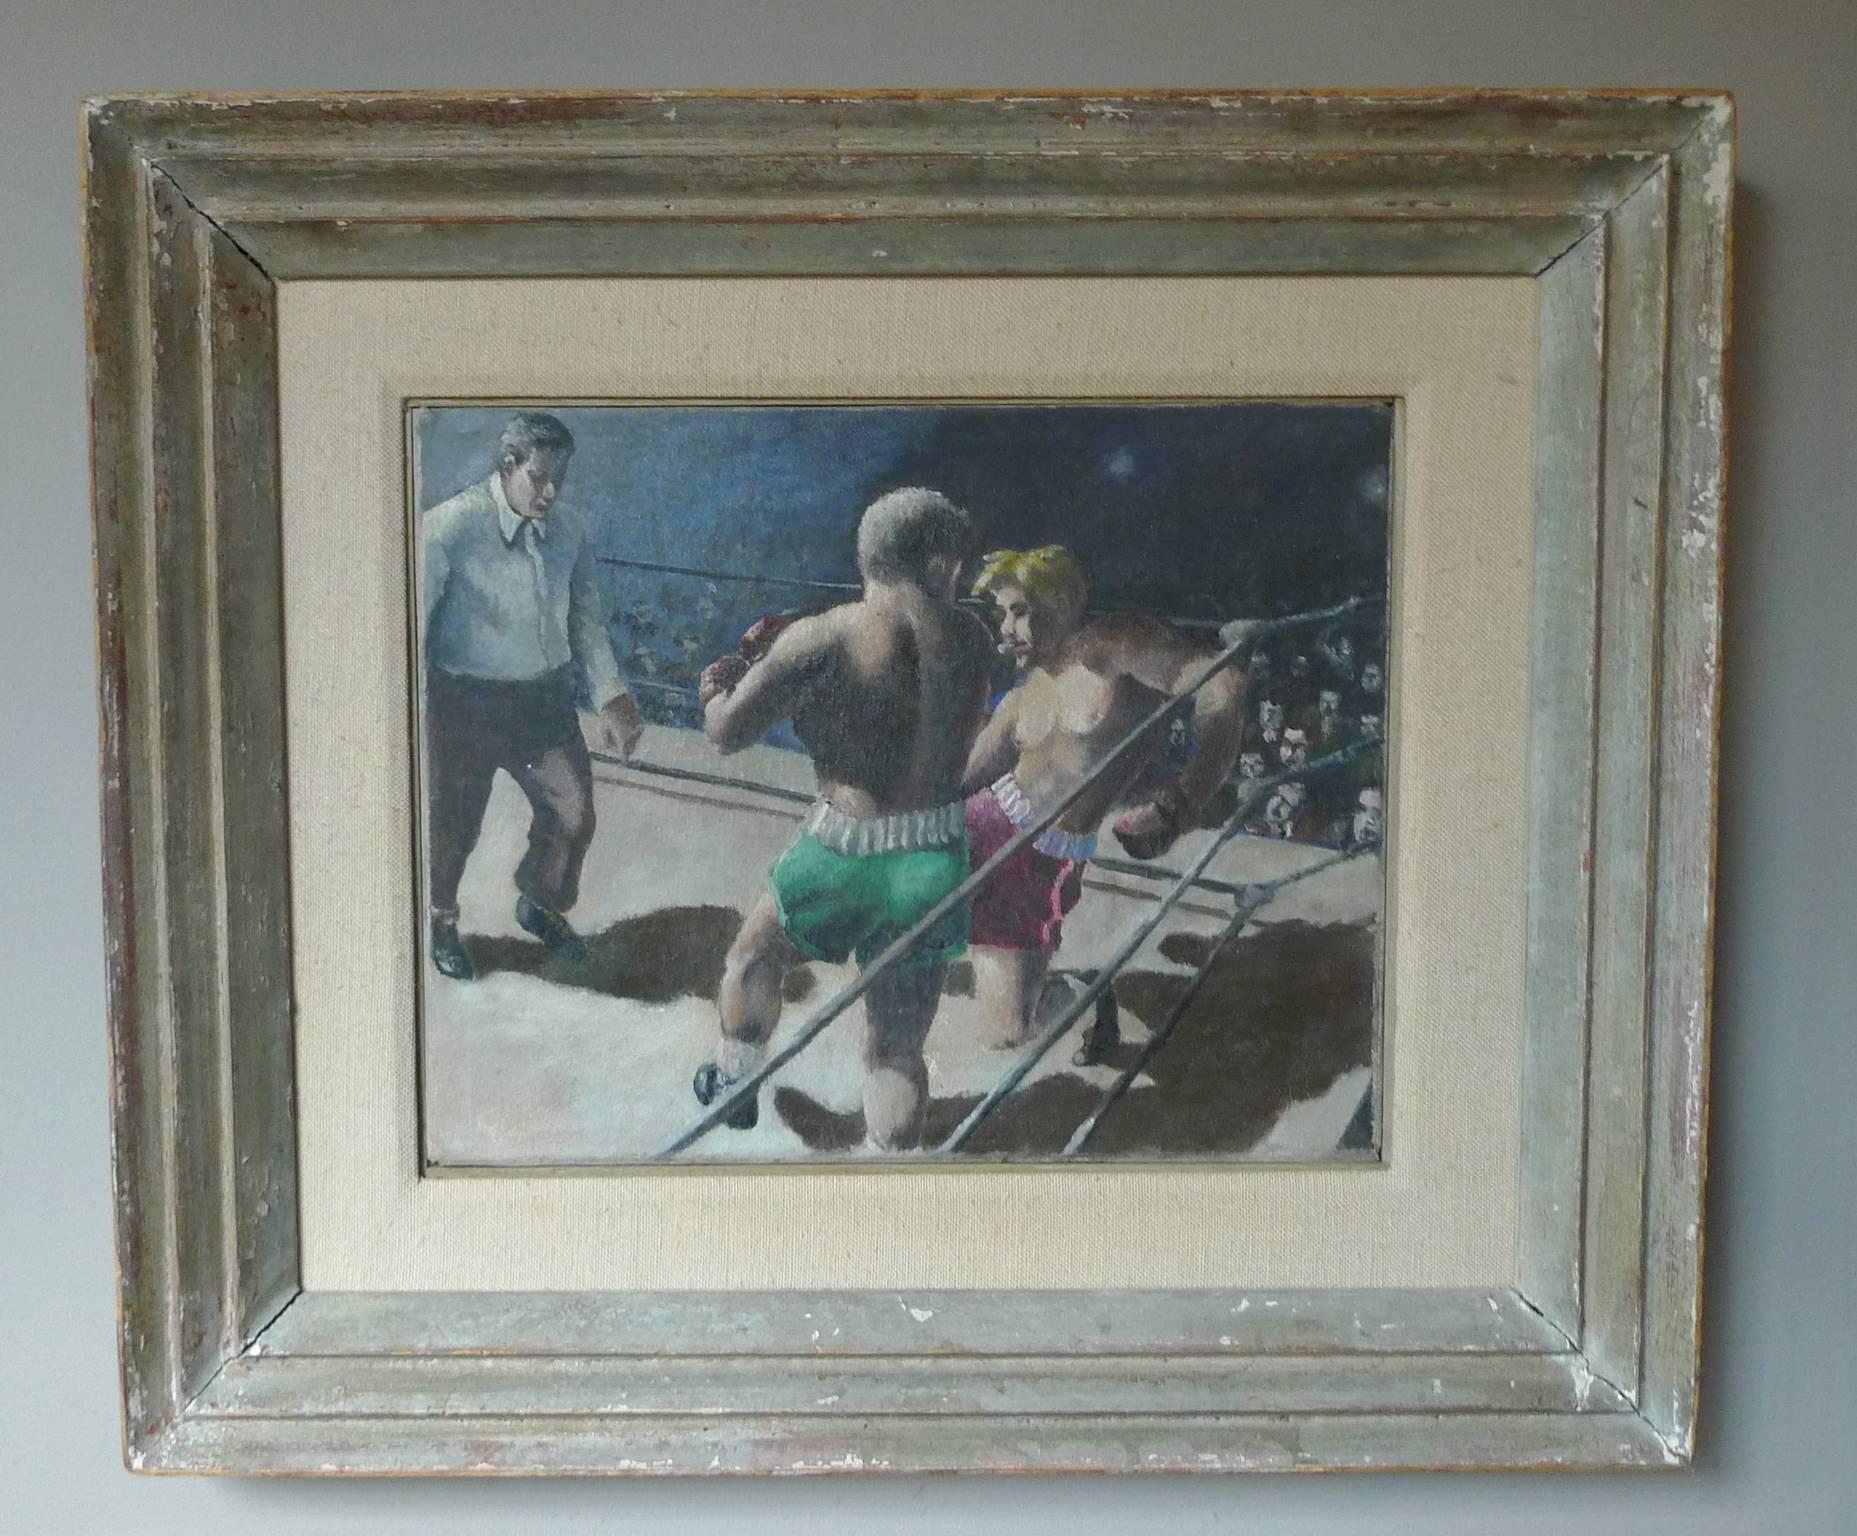 This small oil painting by an unknown artist is titled "Boxing Match". It calls to mind the work of American painter and illustrator Robert Riggs, who also painted dramatic, stylized pictures of boxers in action. The painting's figures are